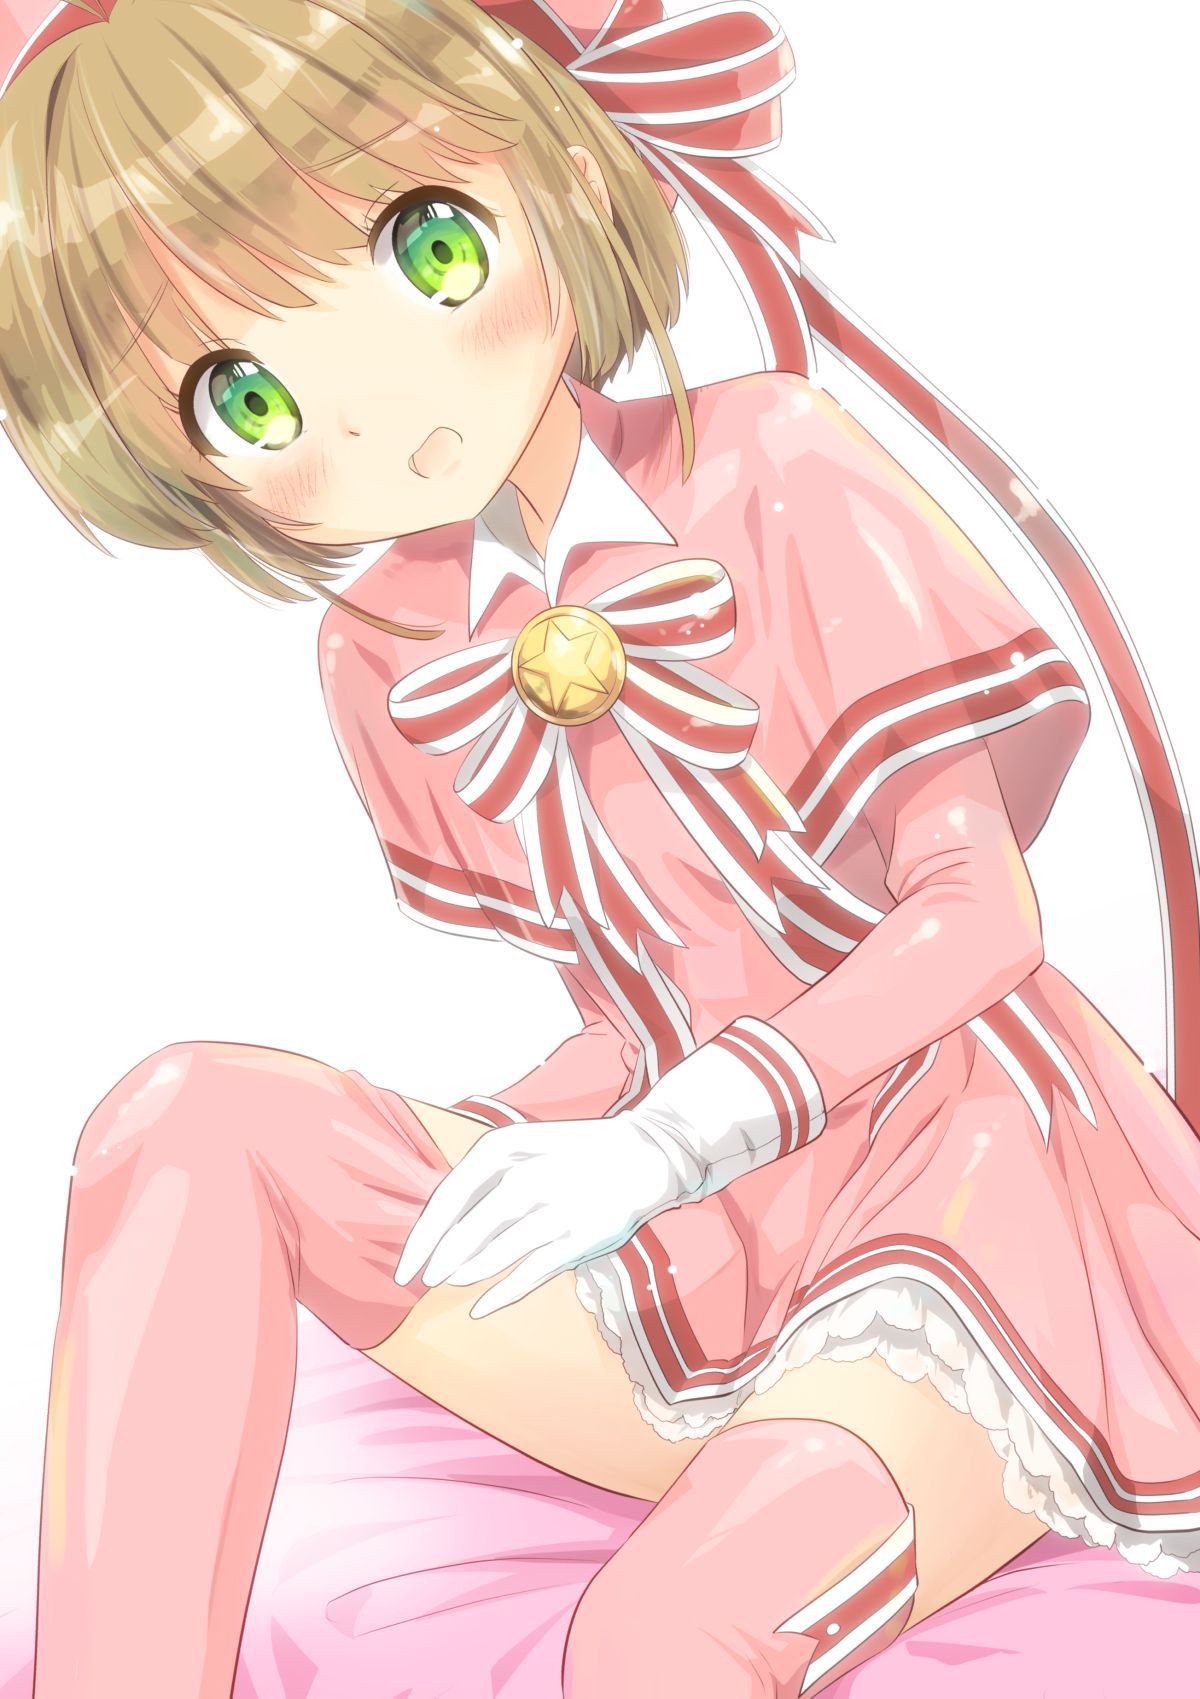 [Secondary ZIP] image of the thighhighs girl showing annoying thigh 20